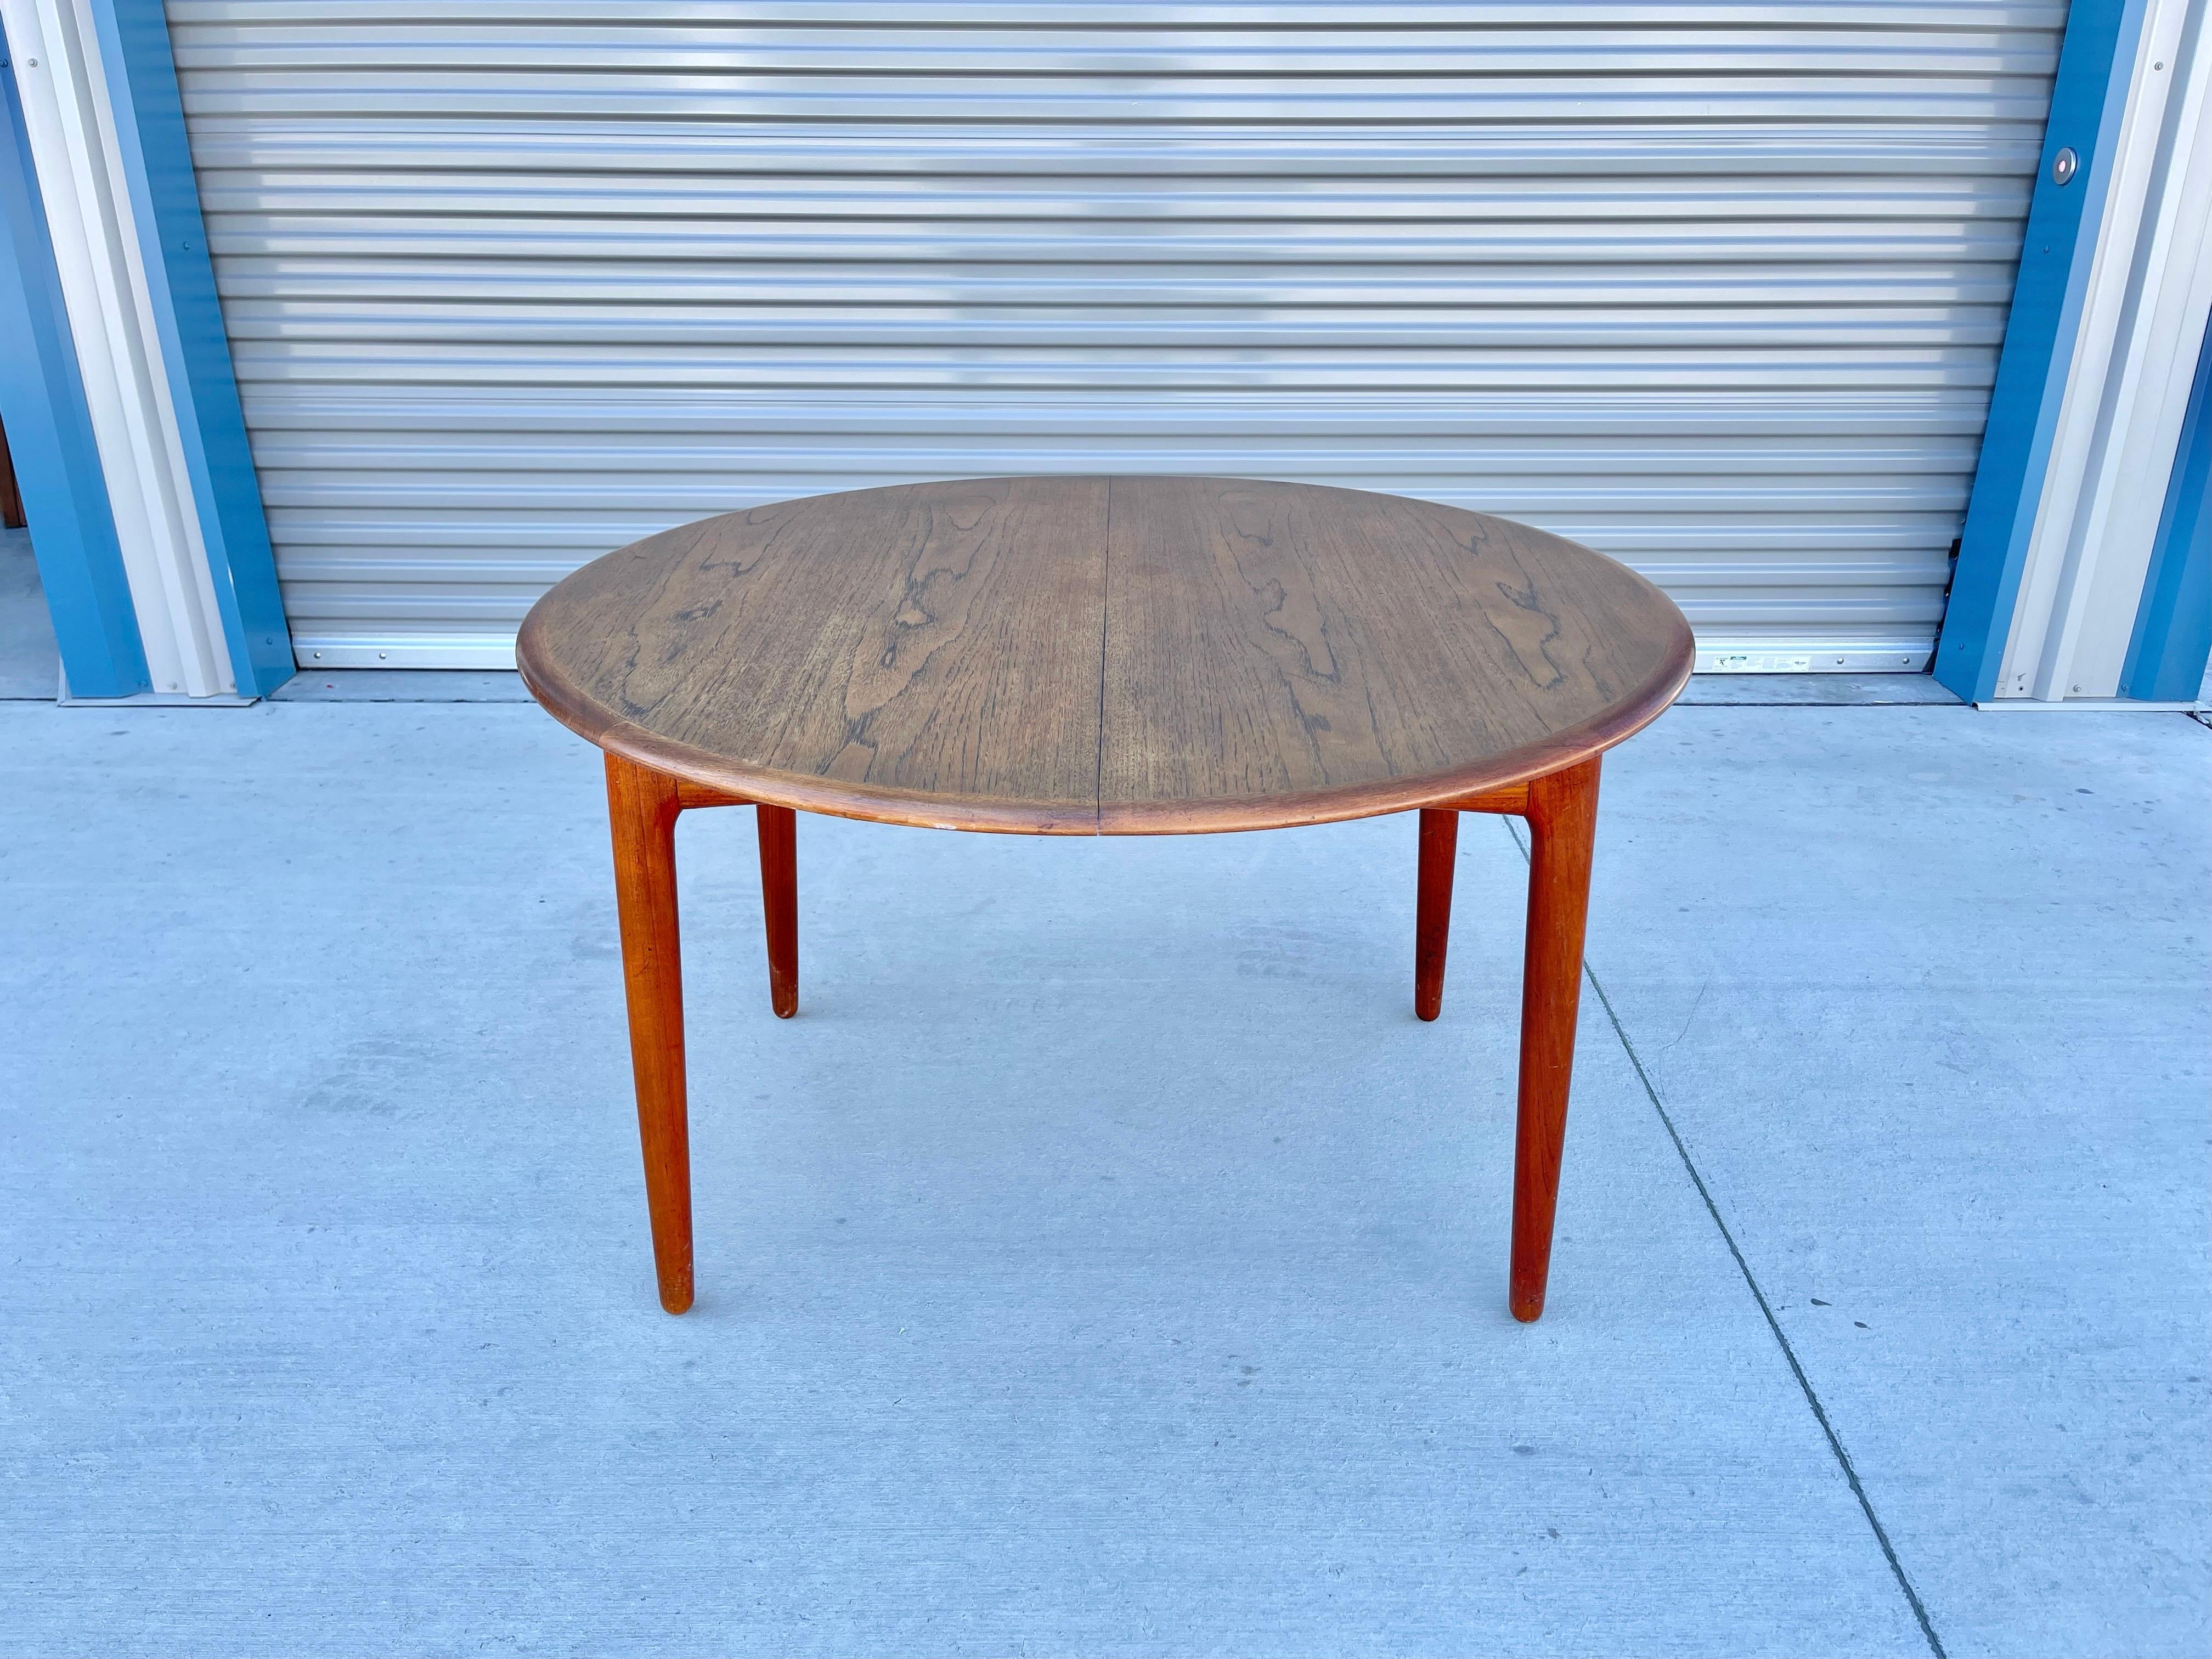 Danish modern teak dining table designed and manufactured in Denmark circa 1960s. This fantastic dining table features a teak frame that gives an excellent color tone and a beautiful grain pattern creating a refined and elegant look. The dining